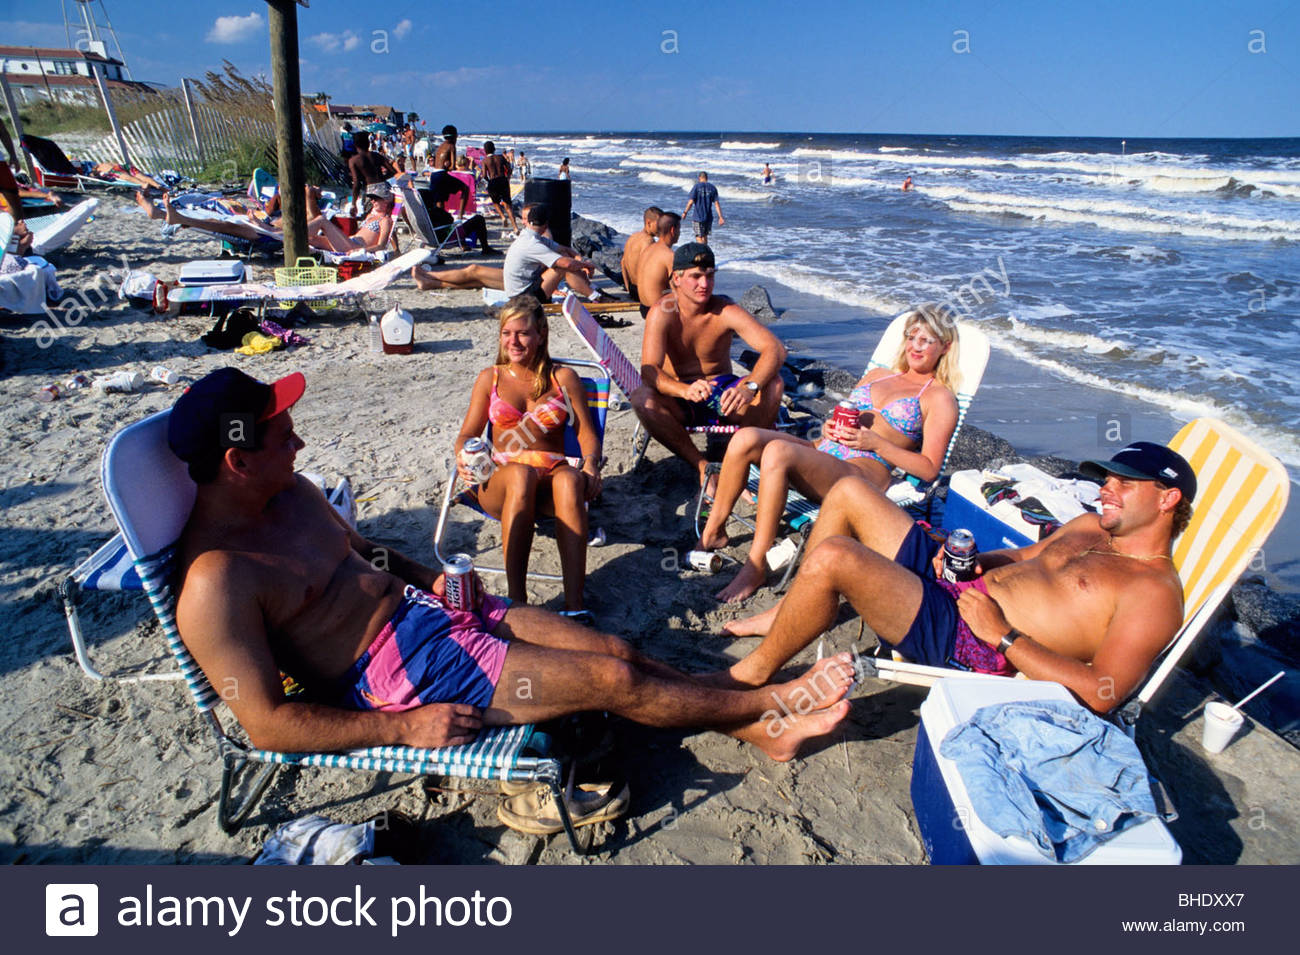 The beach at Tybee Island is famous for its seafood platters and its